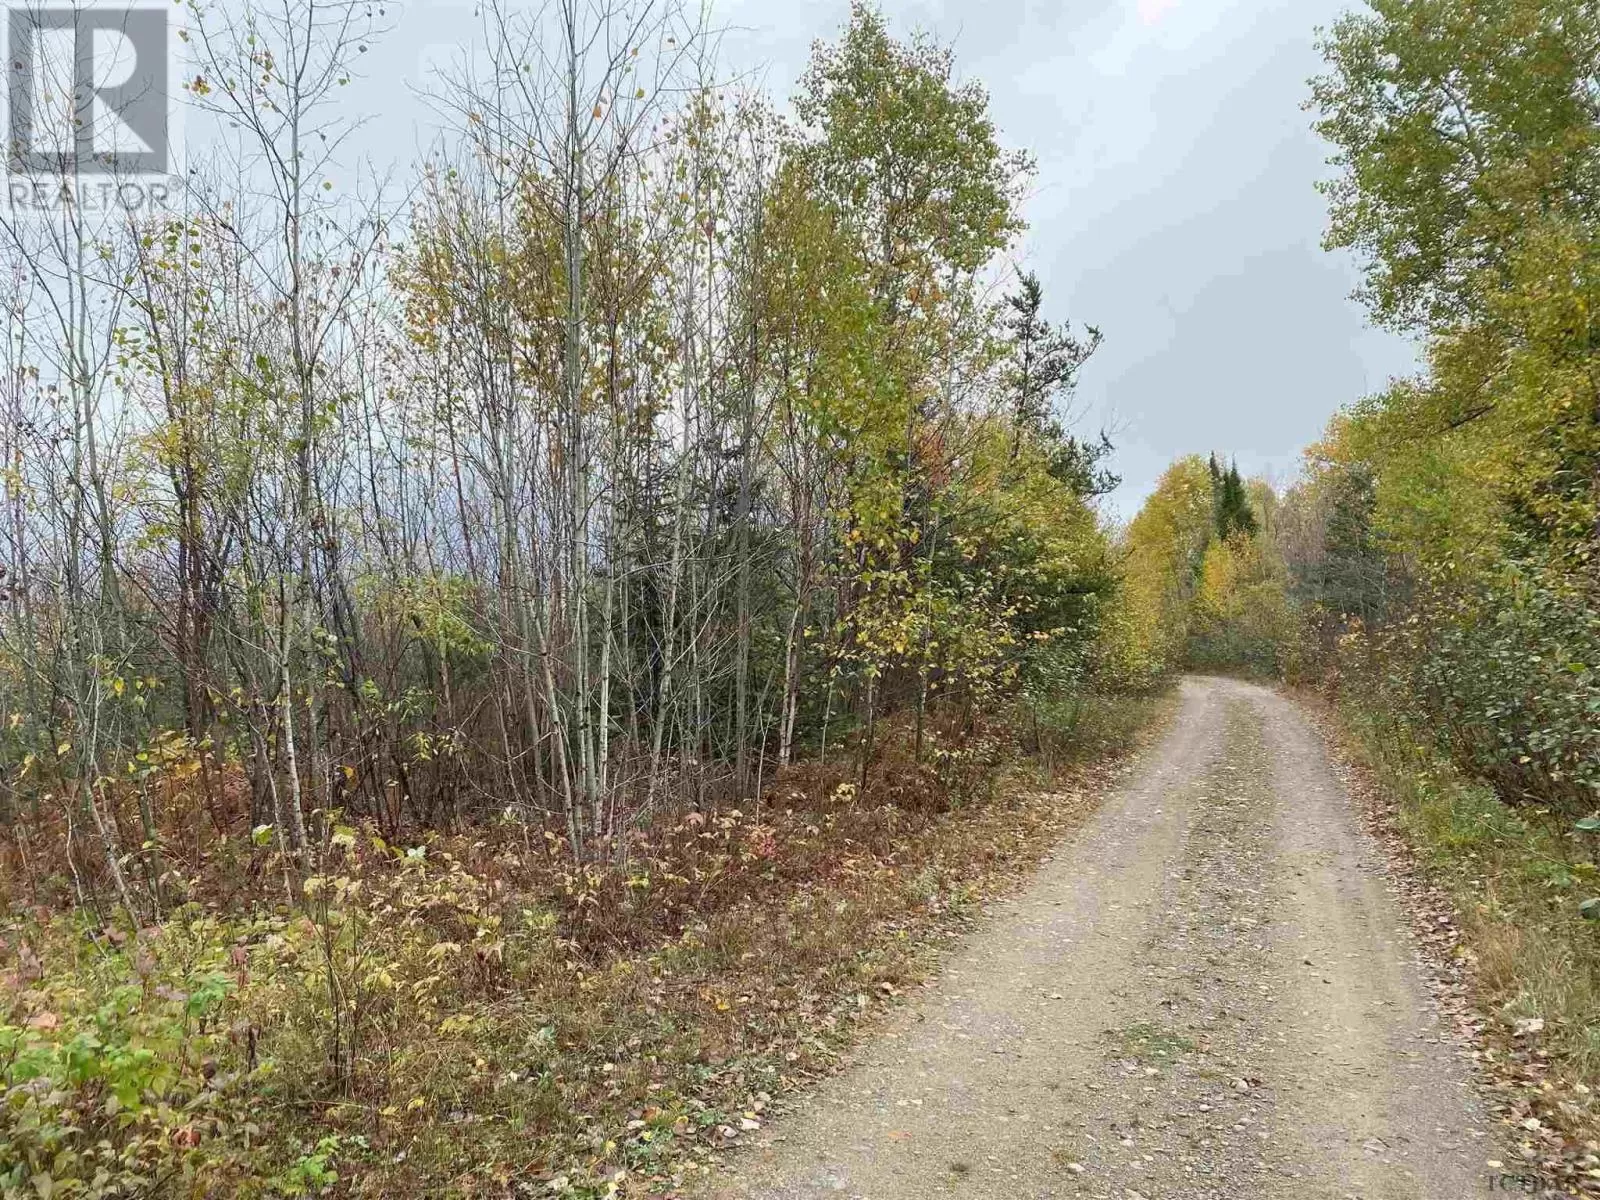 Lot 1 Con 5 Pcl 6283, 6284, 6285, 6286 East Of Road, Marter TWP, Ontario P0J 1H0